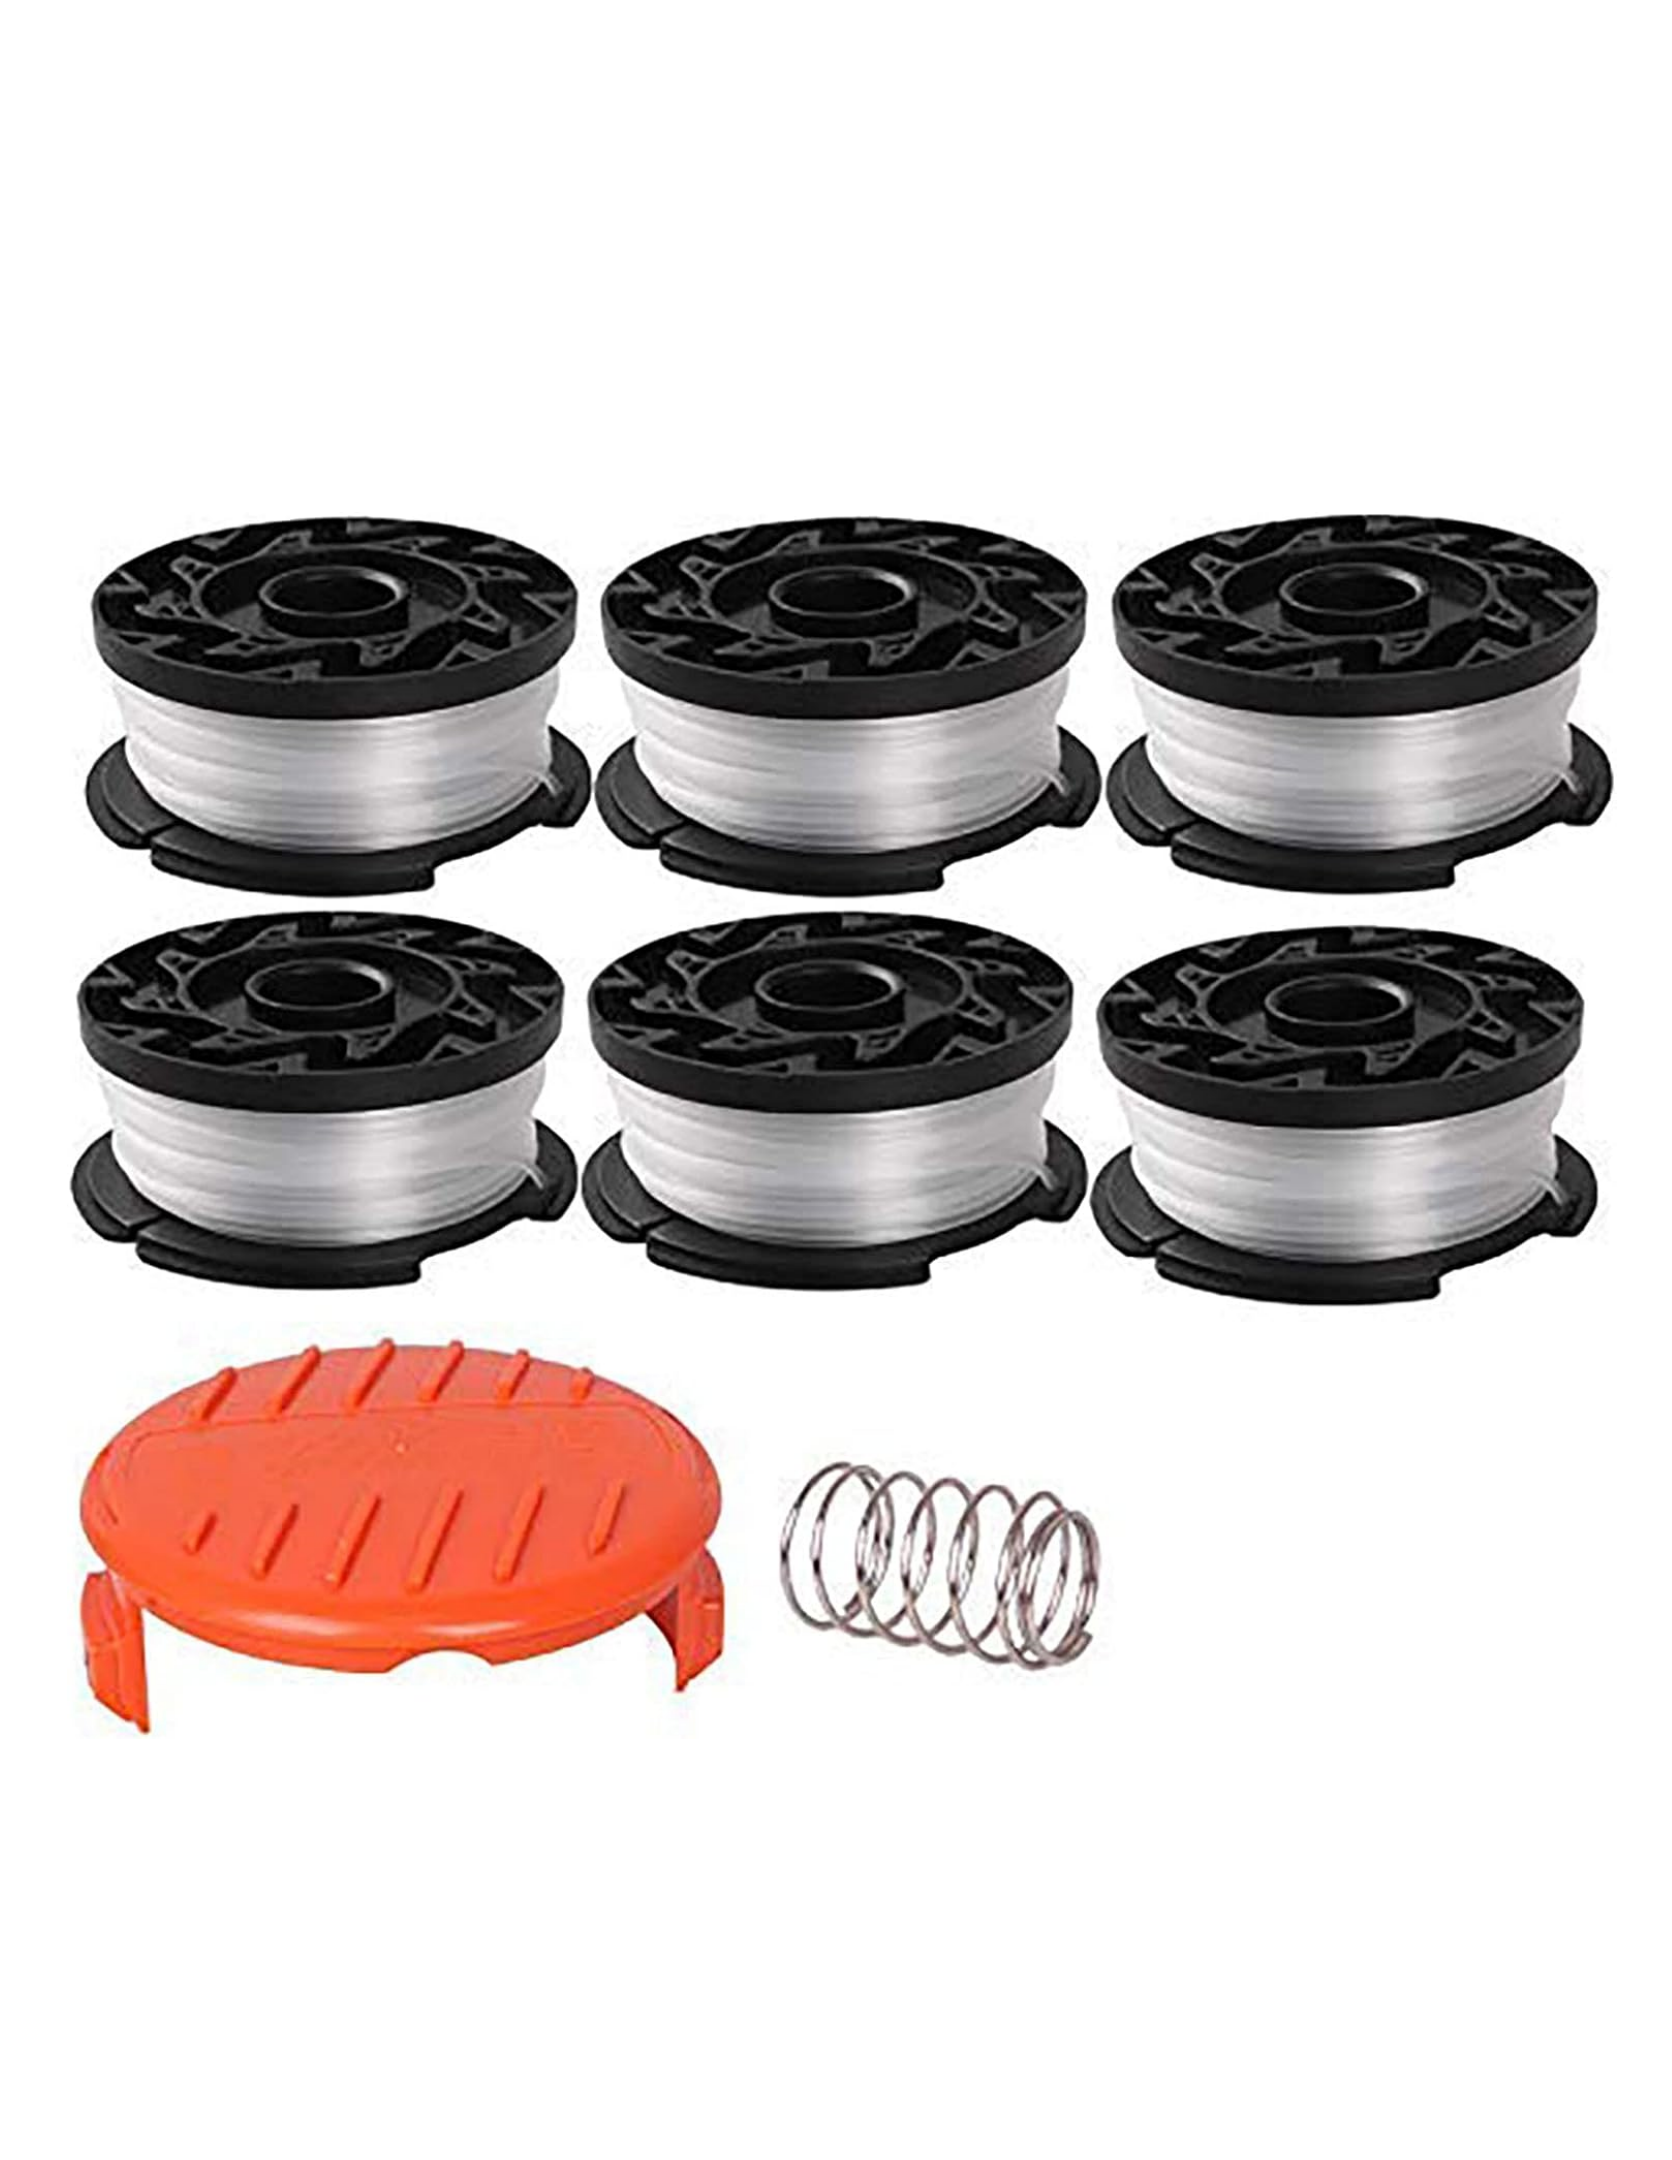 THTEN AF-100 String Trimmer Spool Replacement for Black and Decker 30ft 0.065" Refills Line Auto Feed Single Weed Eater,GH600 GH900 Edger with RC-100-P Spool Cap Covers (6 Spools, 1 Cap,1 Spring)